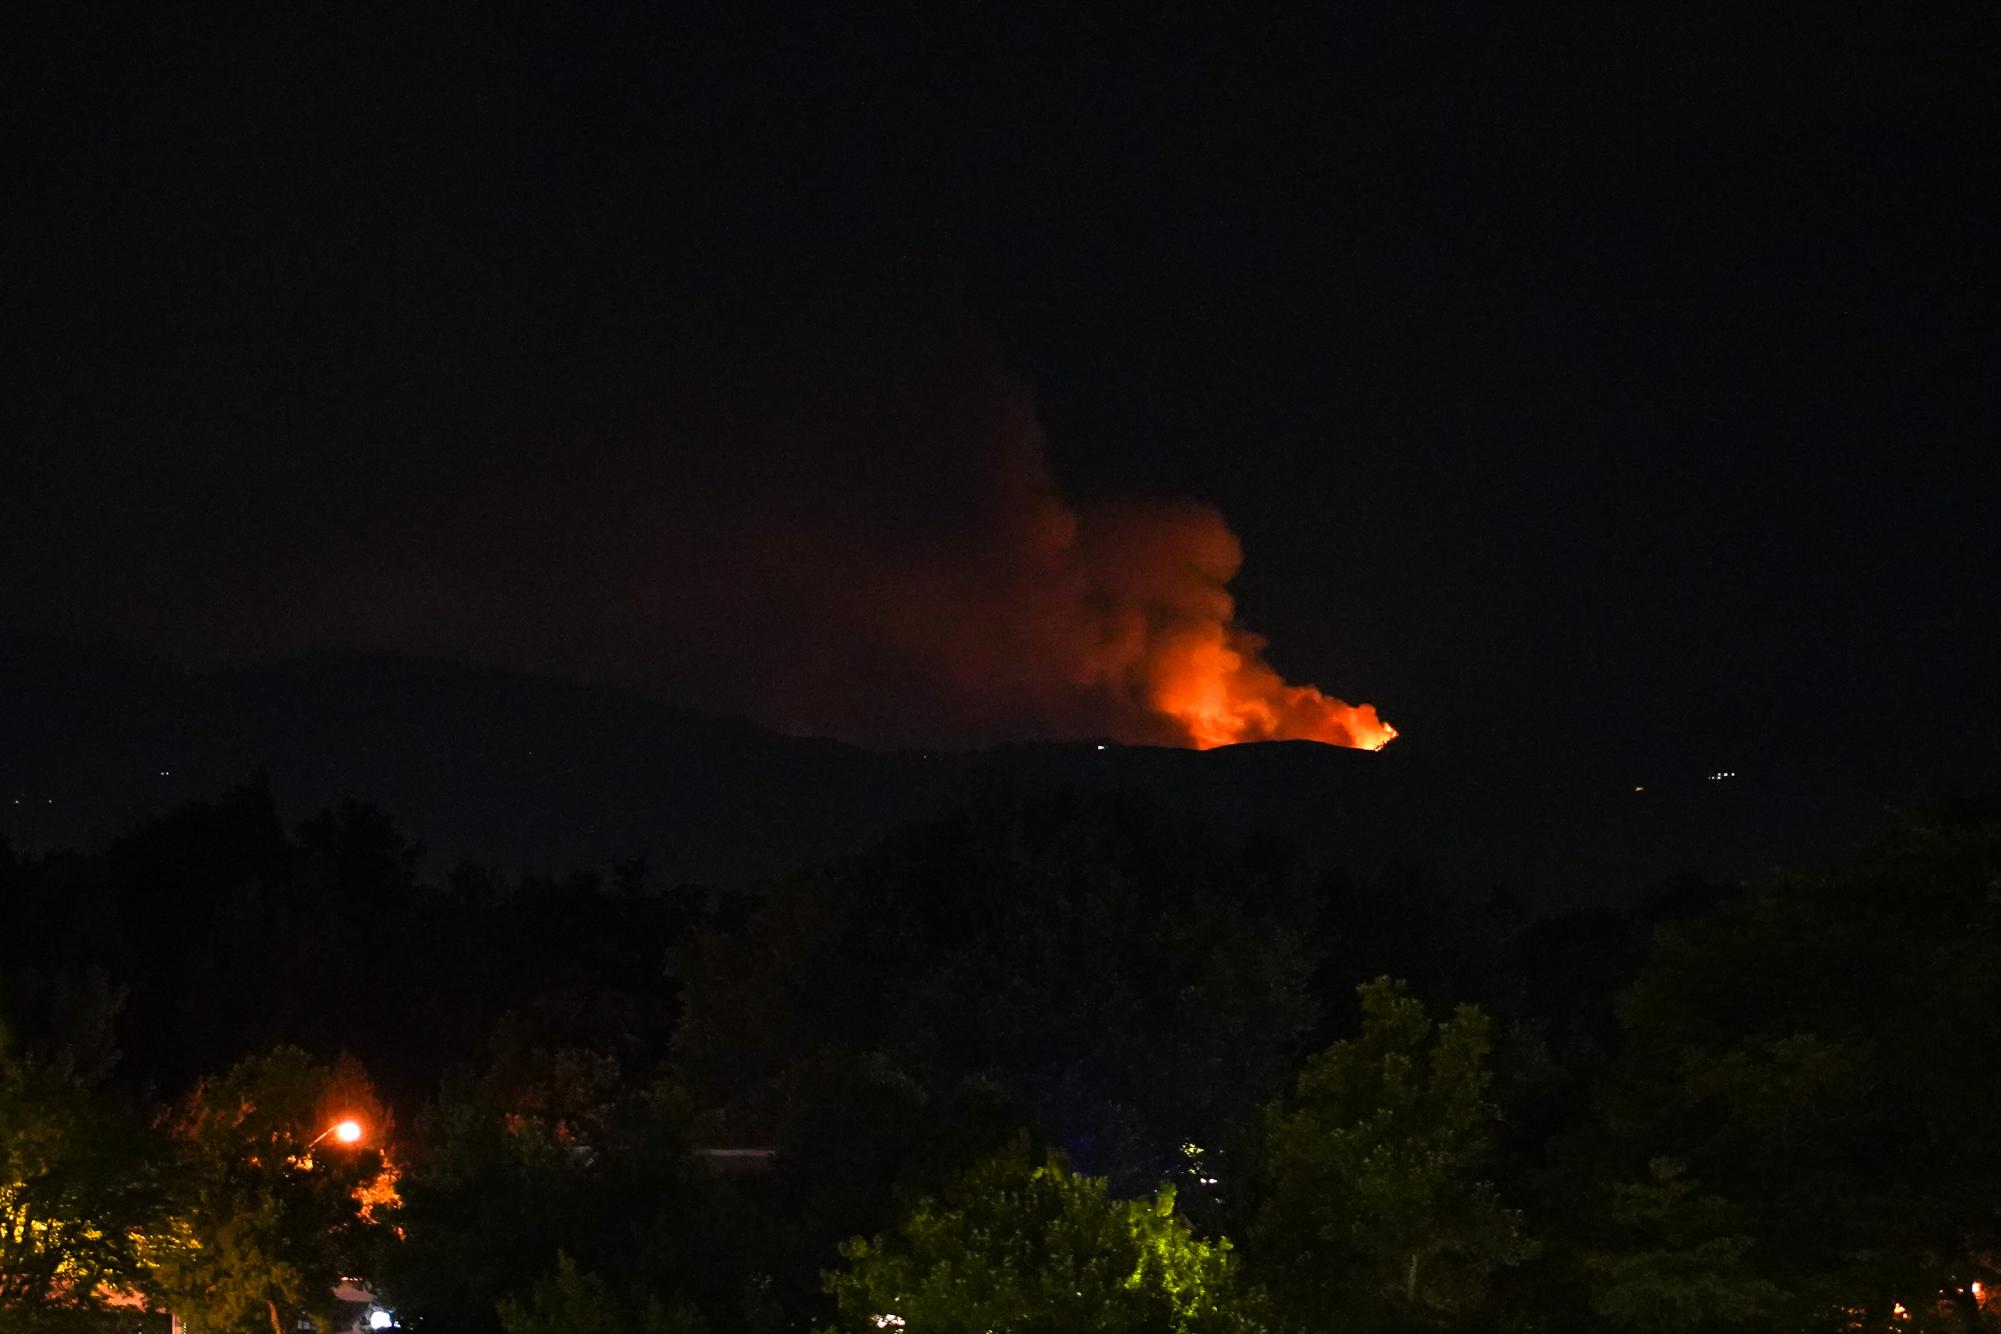 Update%3A+49+structures+damaged+in+Alexander+Mountain+Fire+as+containment+efforts+continue